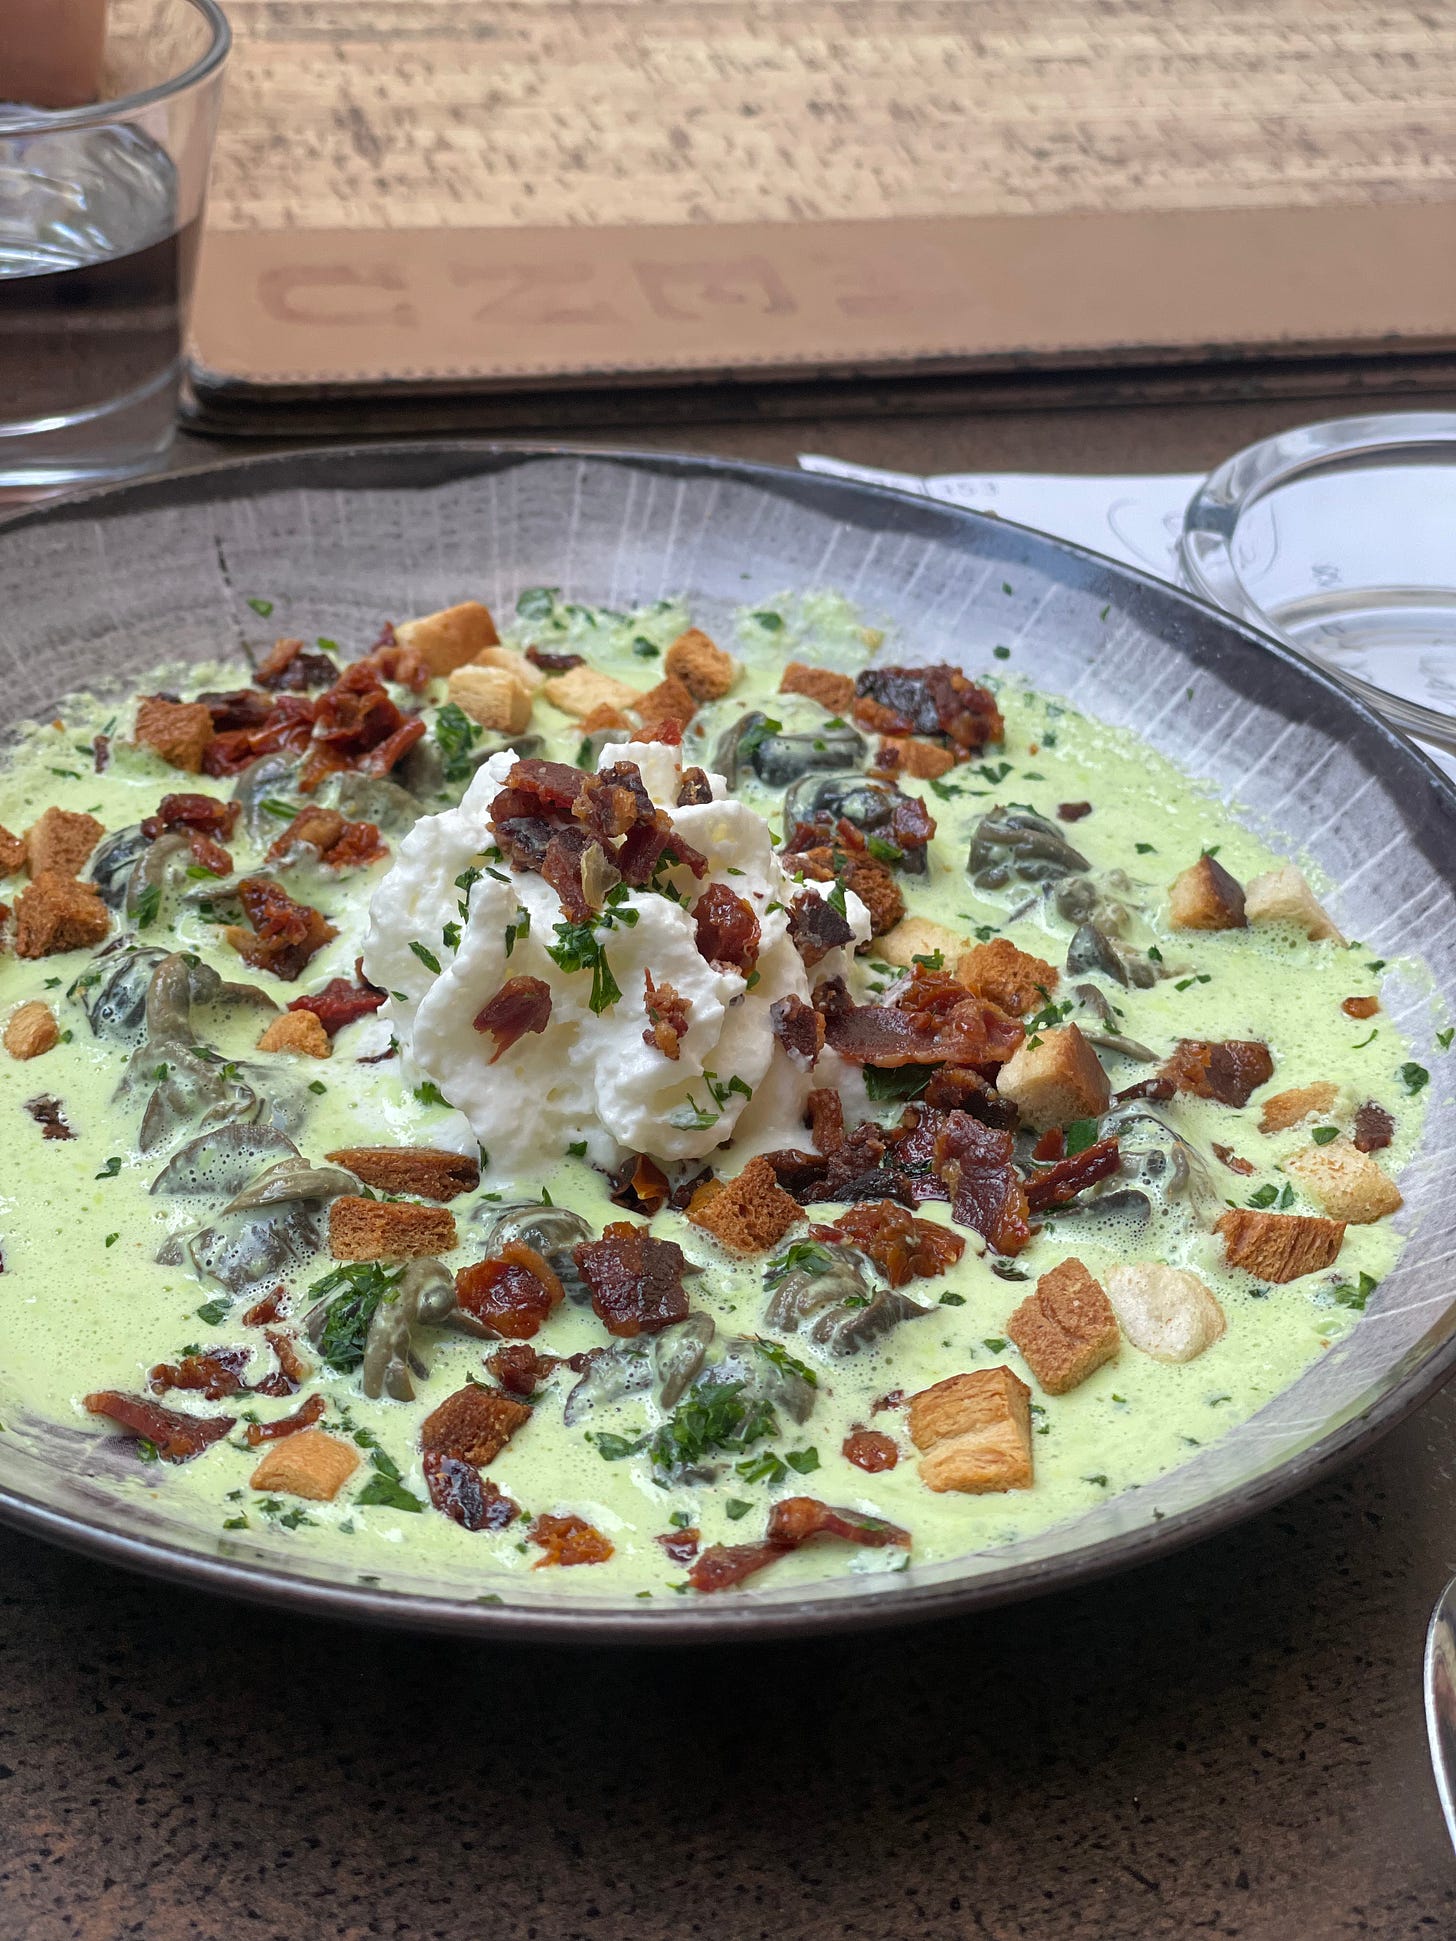 Dish containing escargots, bacon, and parsley